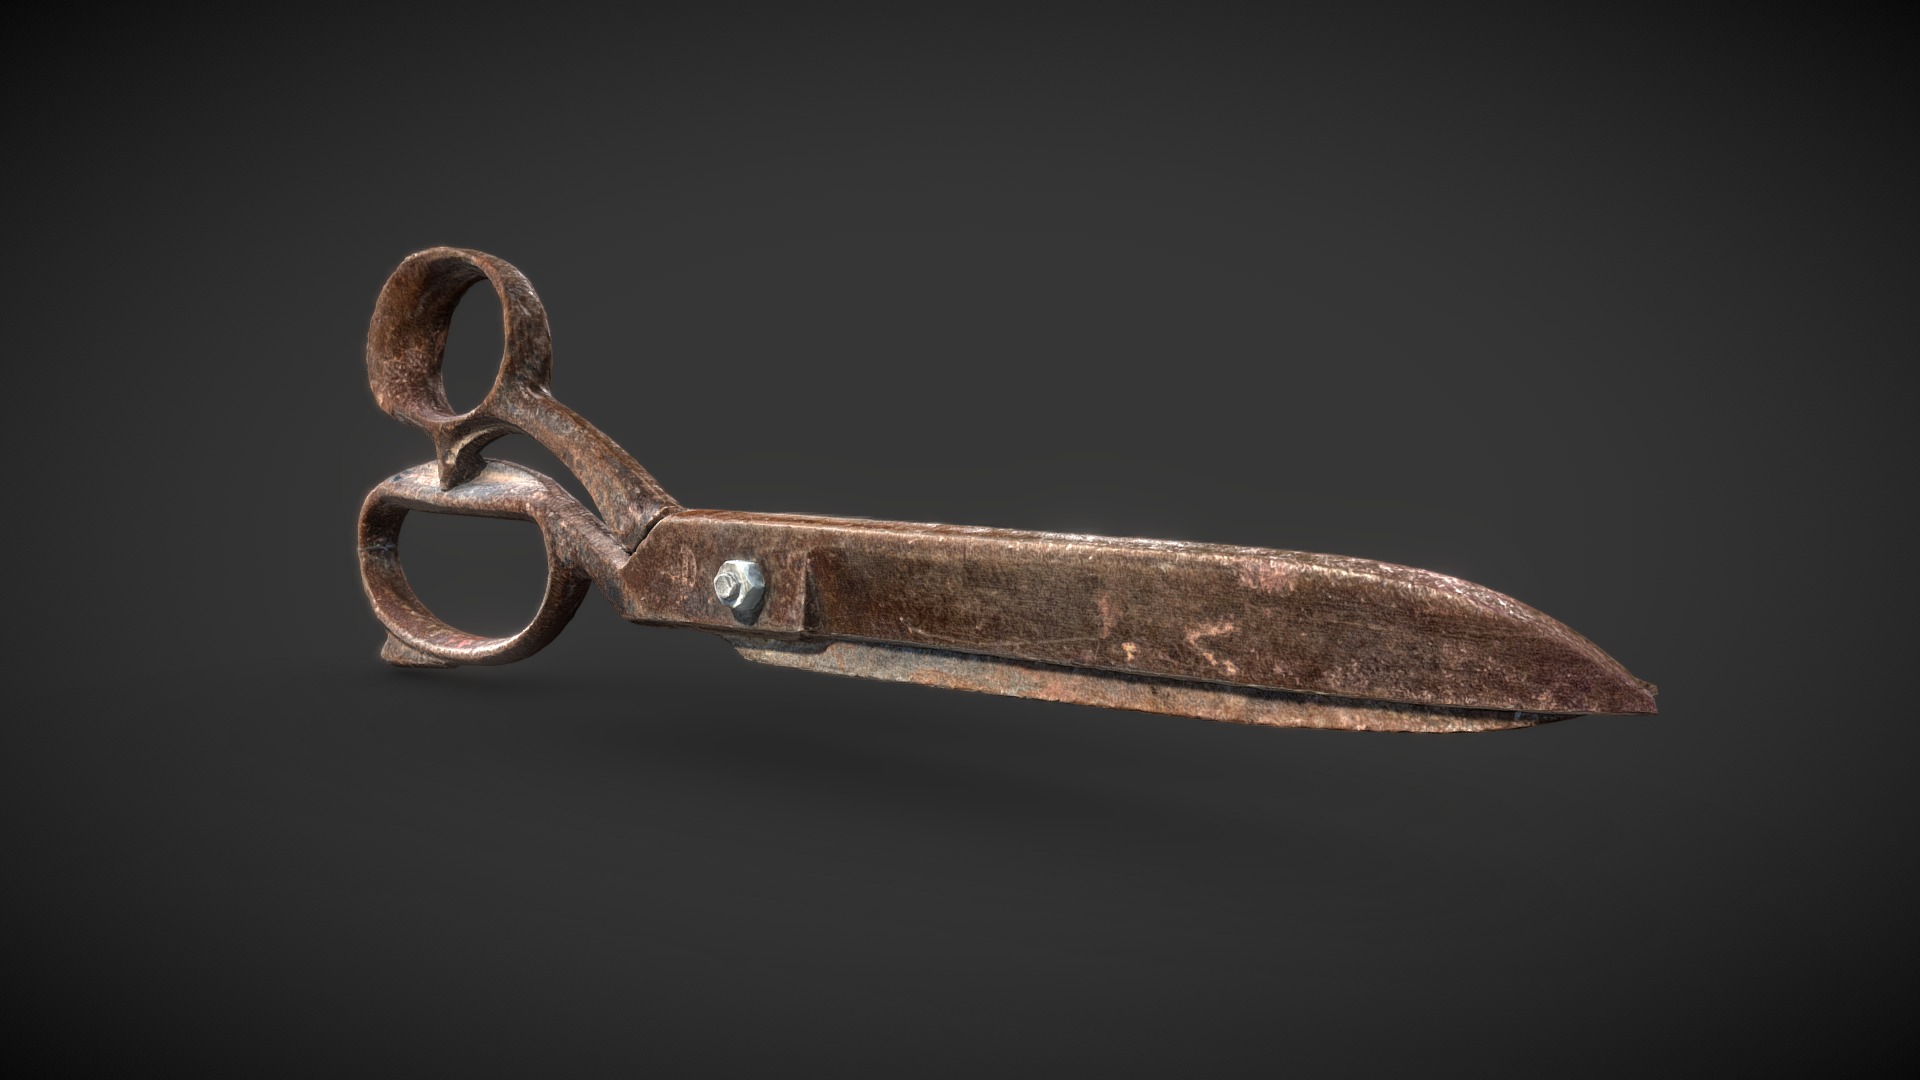 3D model Old Rusty Scissors 3D Scan - This is a 3D model of the Old Rusty Scissors 3D Scan. The 3D model is about a pair of scissors.